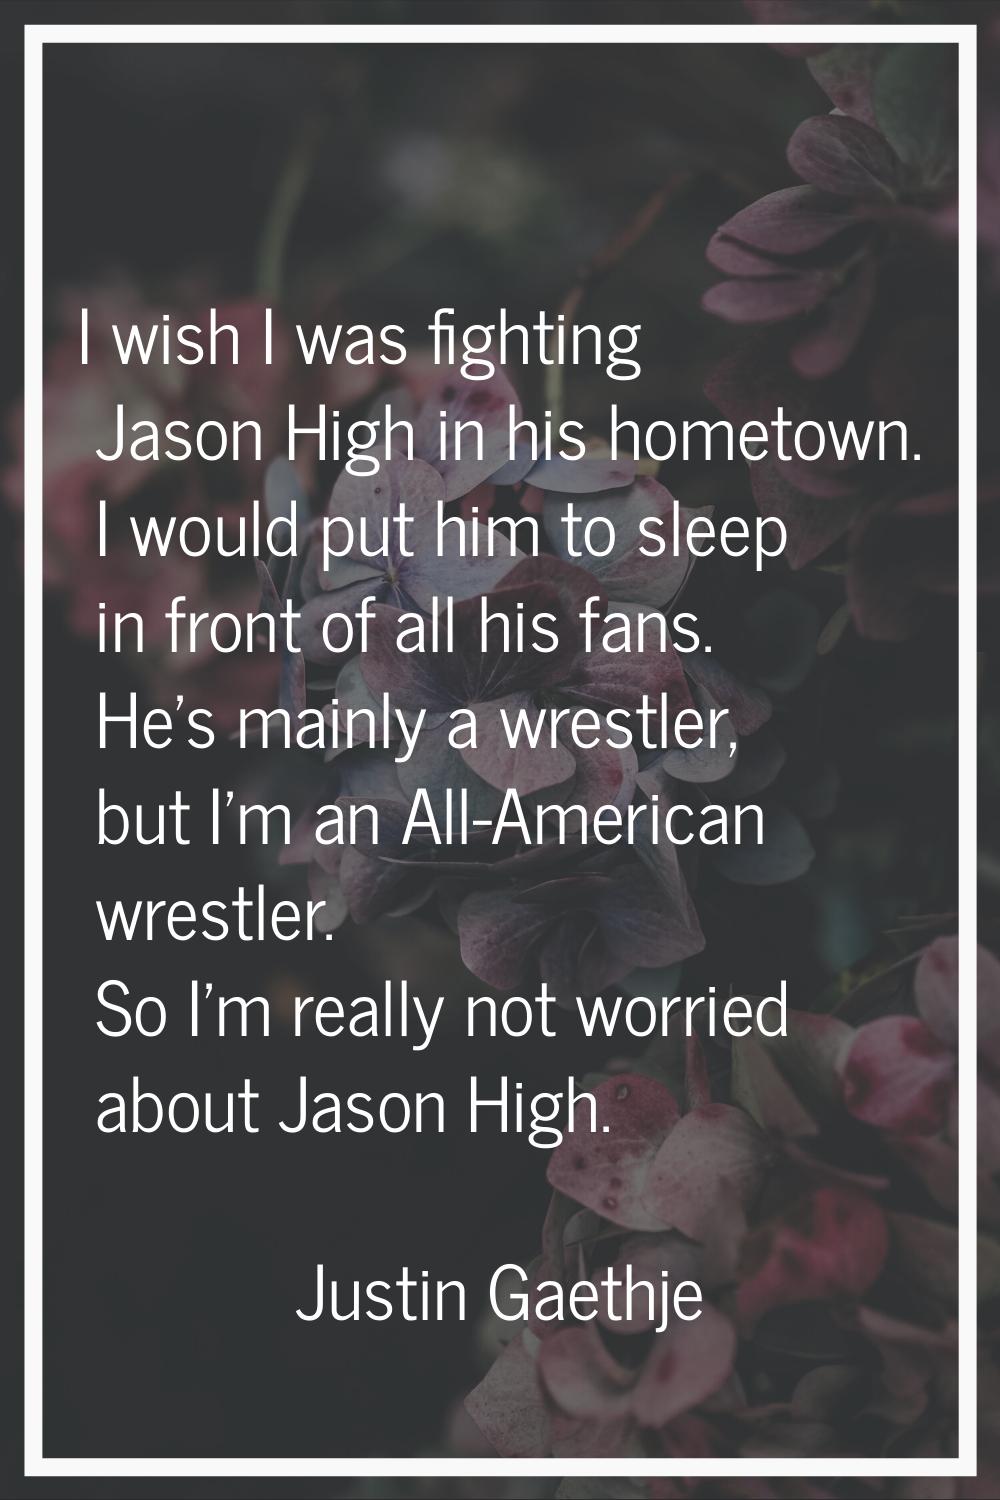 I wish I was fighting Jason High in his hometown. I would put him to sleep in front of all his fans